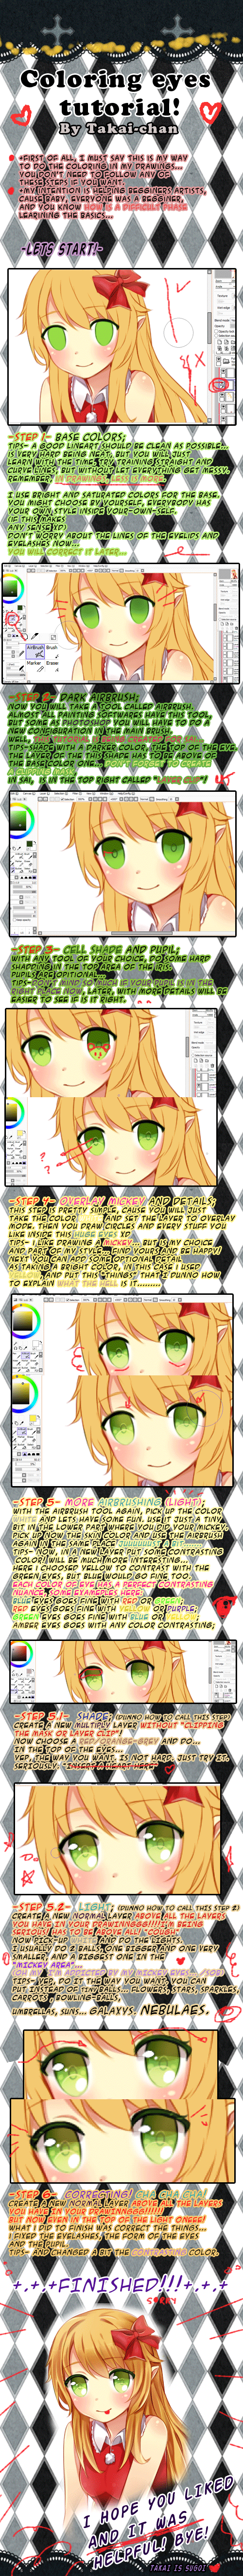 Animated Coloring Eyes Tutorial By Hyuugalanna On DeviantArt